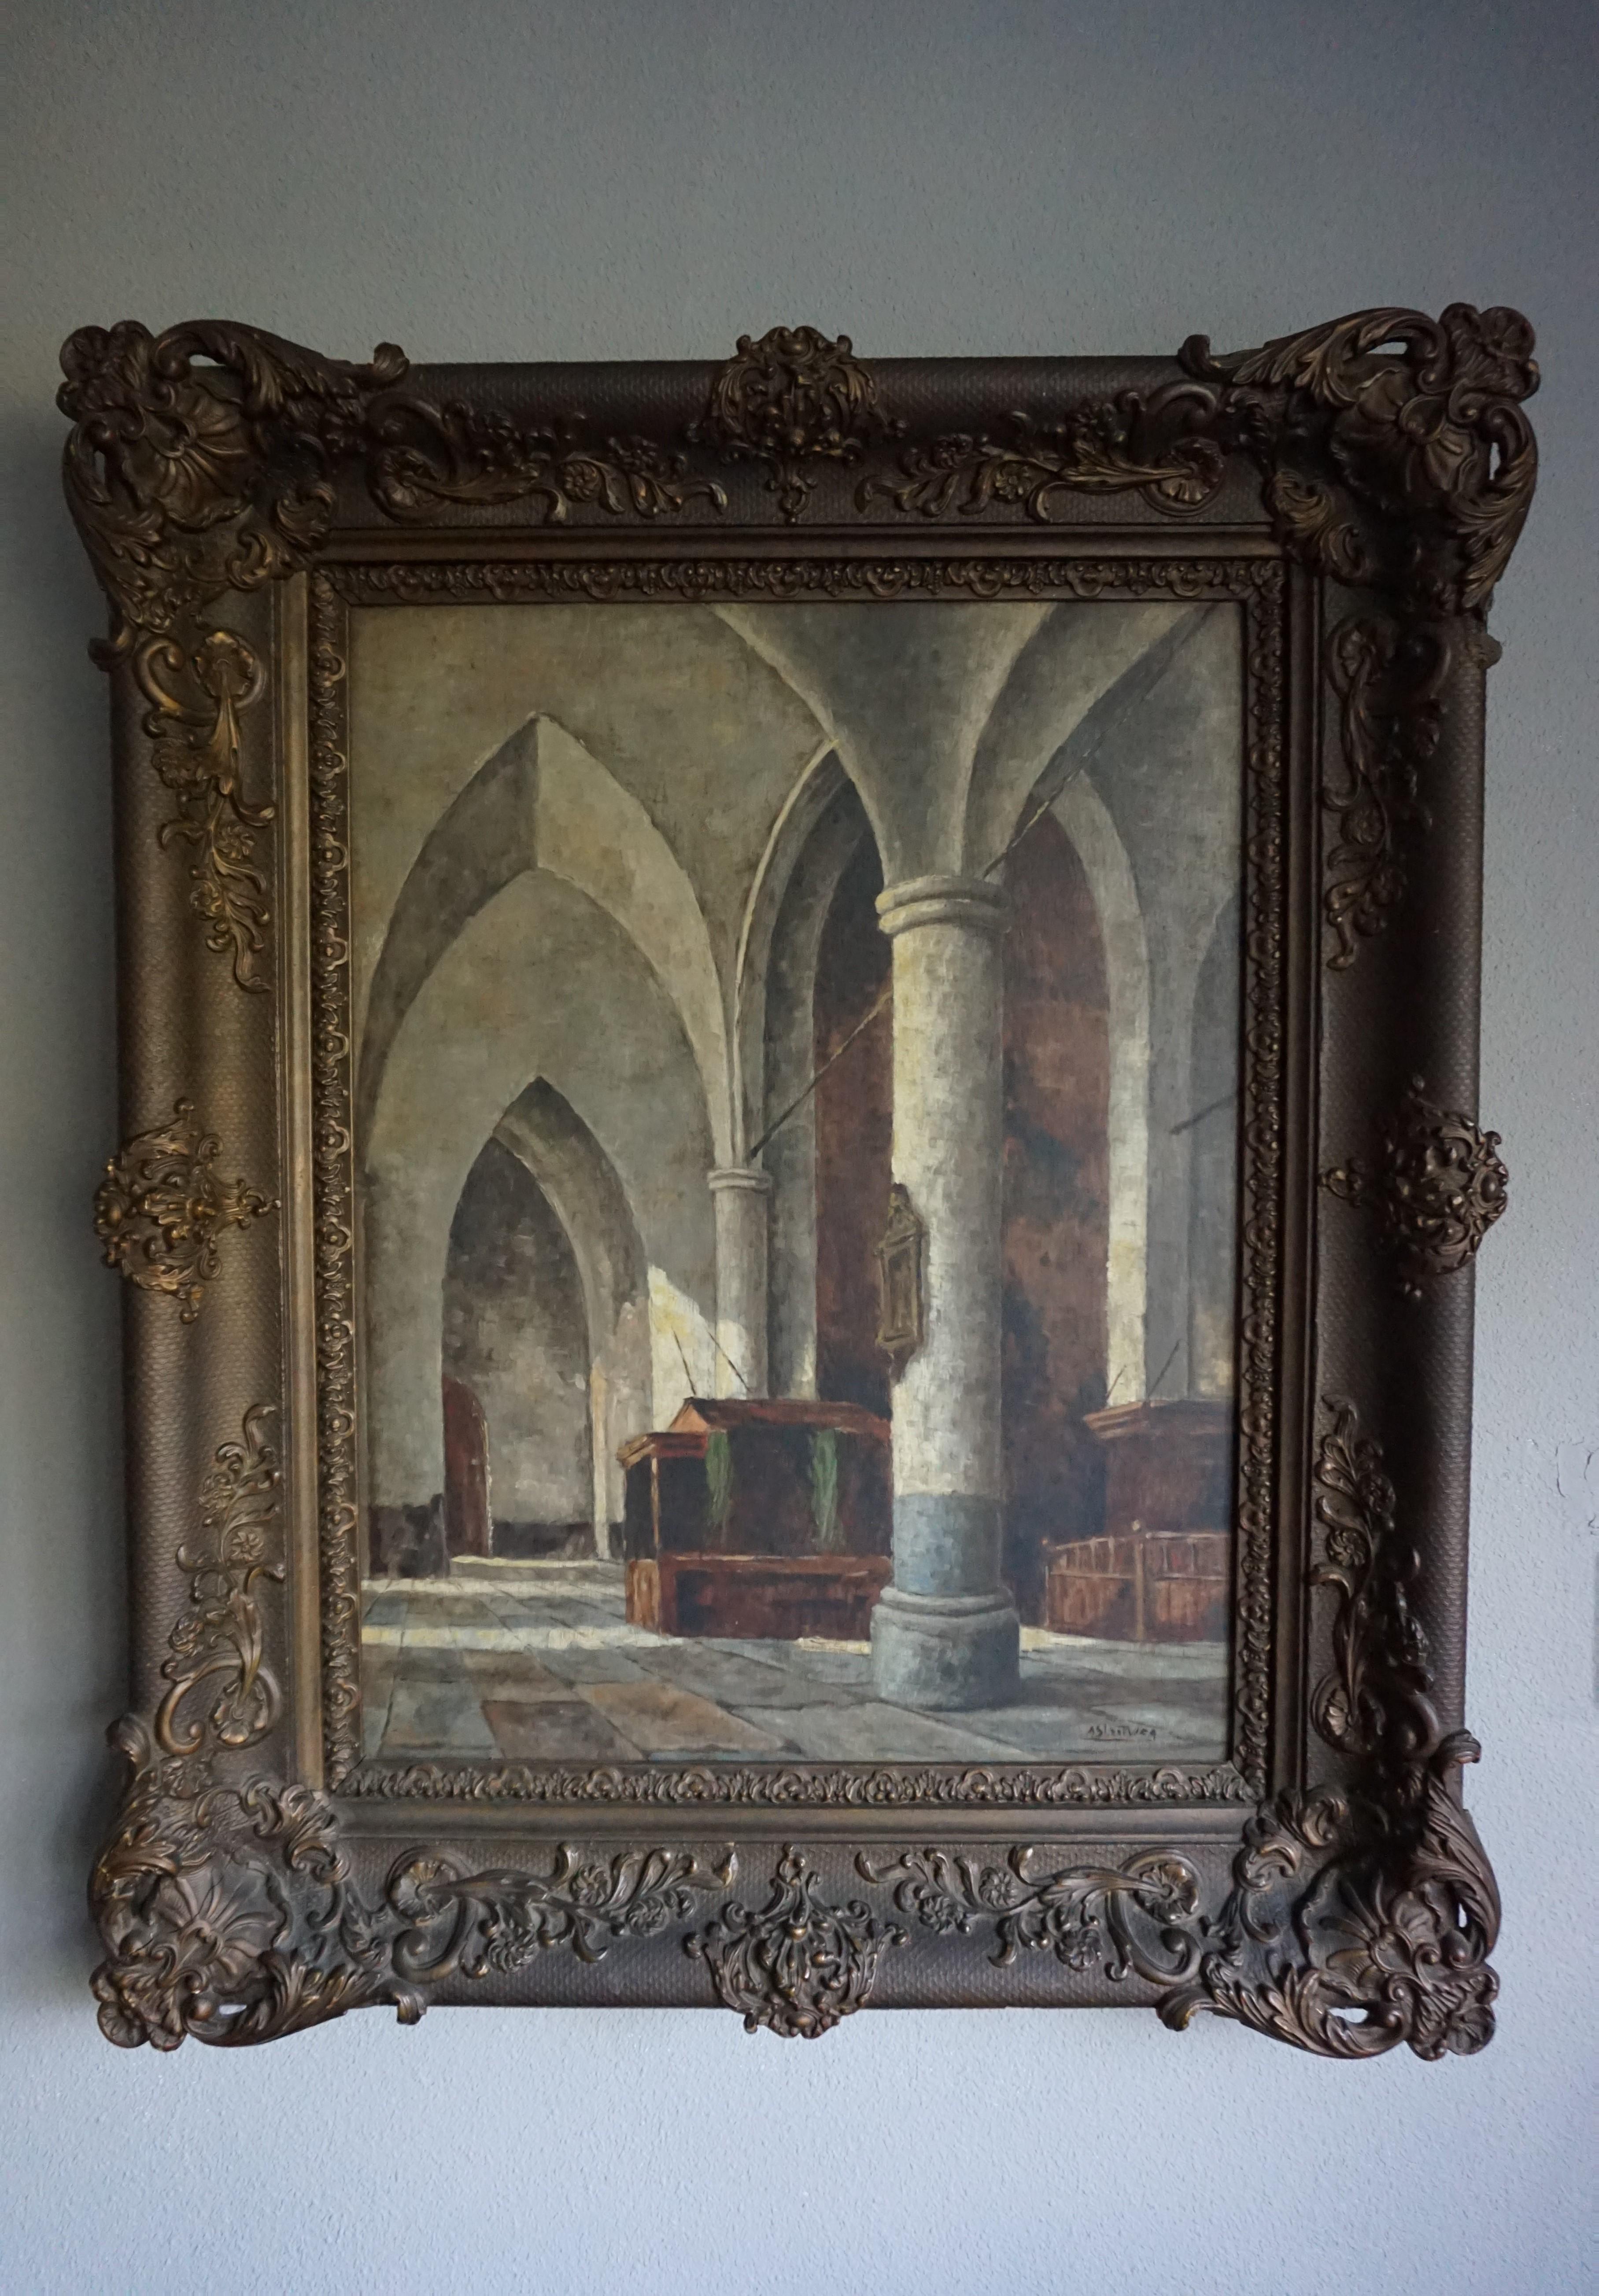 Beautiful oil on panel painting of a Gothic church interior.

This early 20th century, hand painted work of Gothic Art is in a stunning and ornate 19th century frame. Because of their contrasting styles, of what in essence are two works of art,